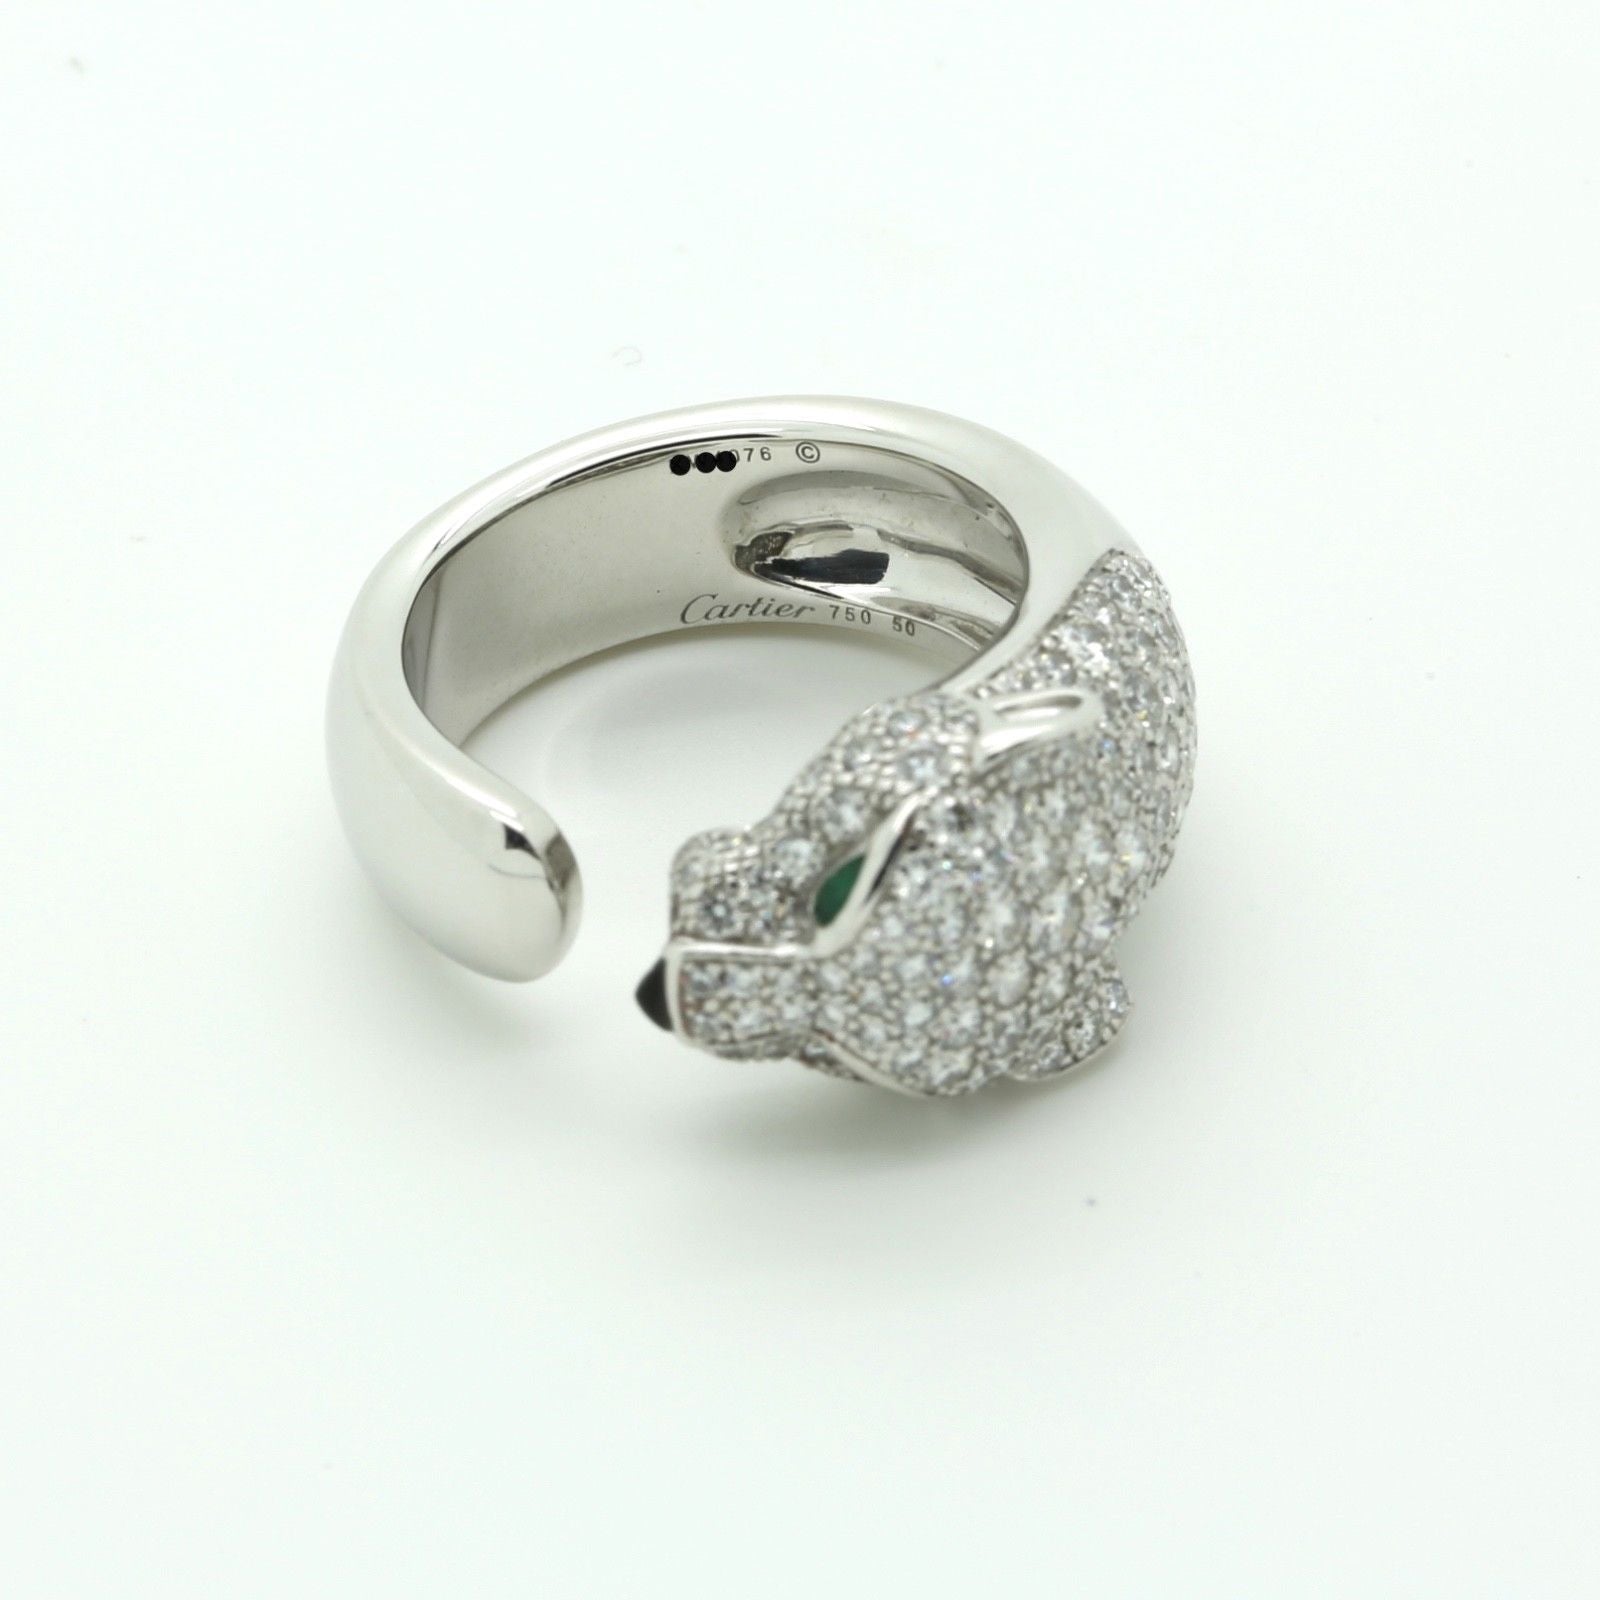 Cartier Panthere Ring in 18k White Gold 